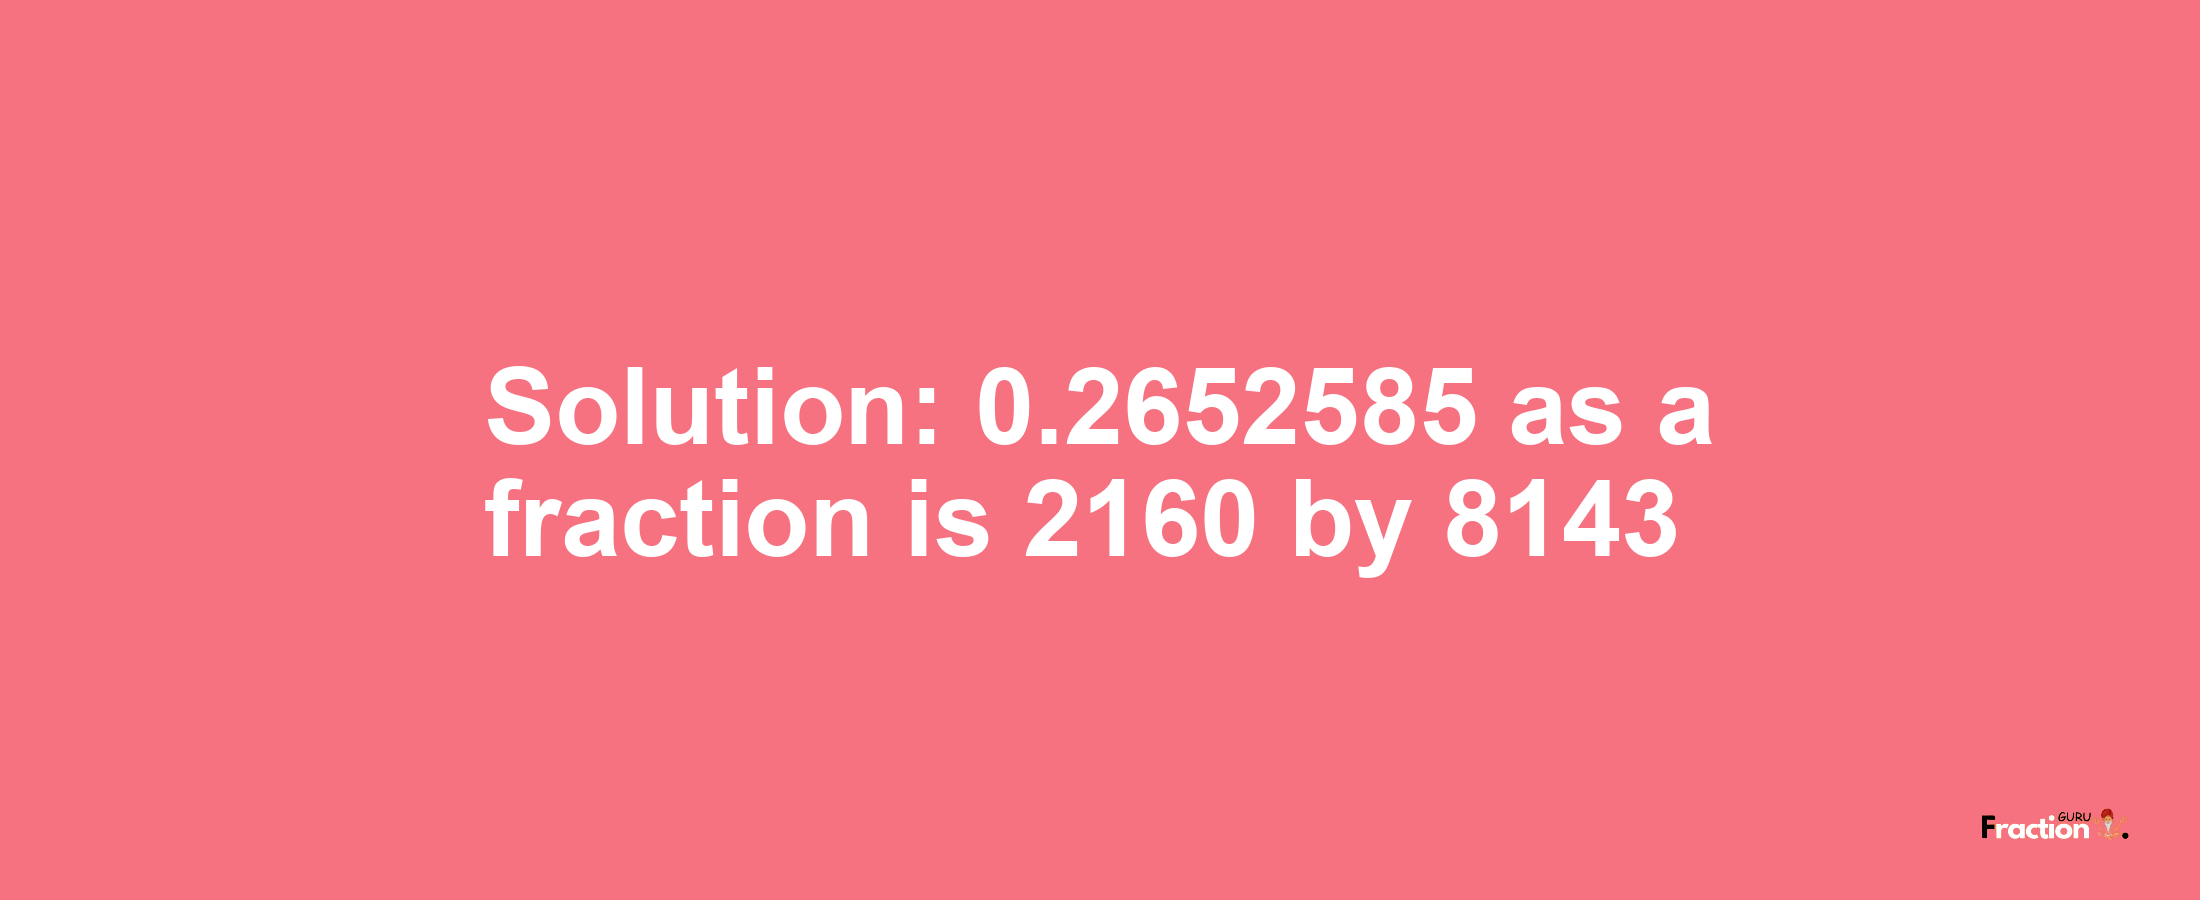 Solution:0.2652585 as a fraction is 2160/8143